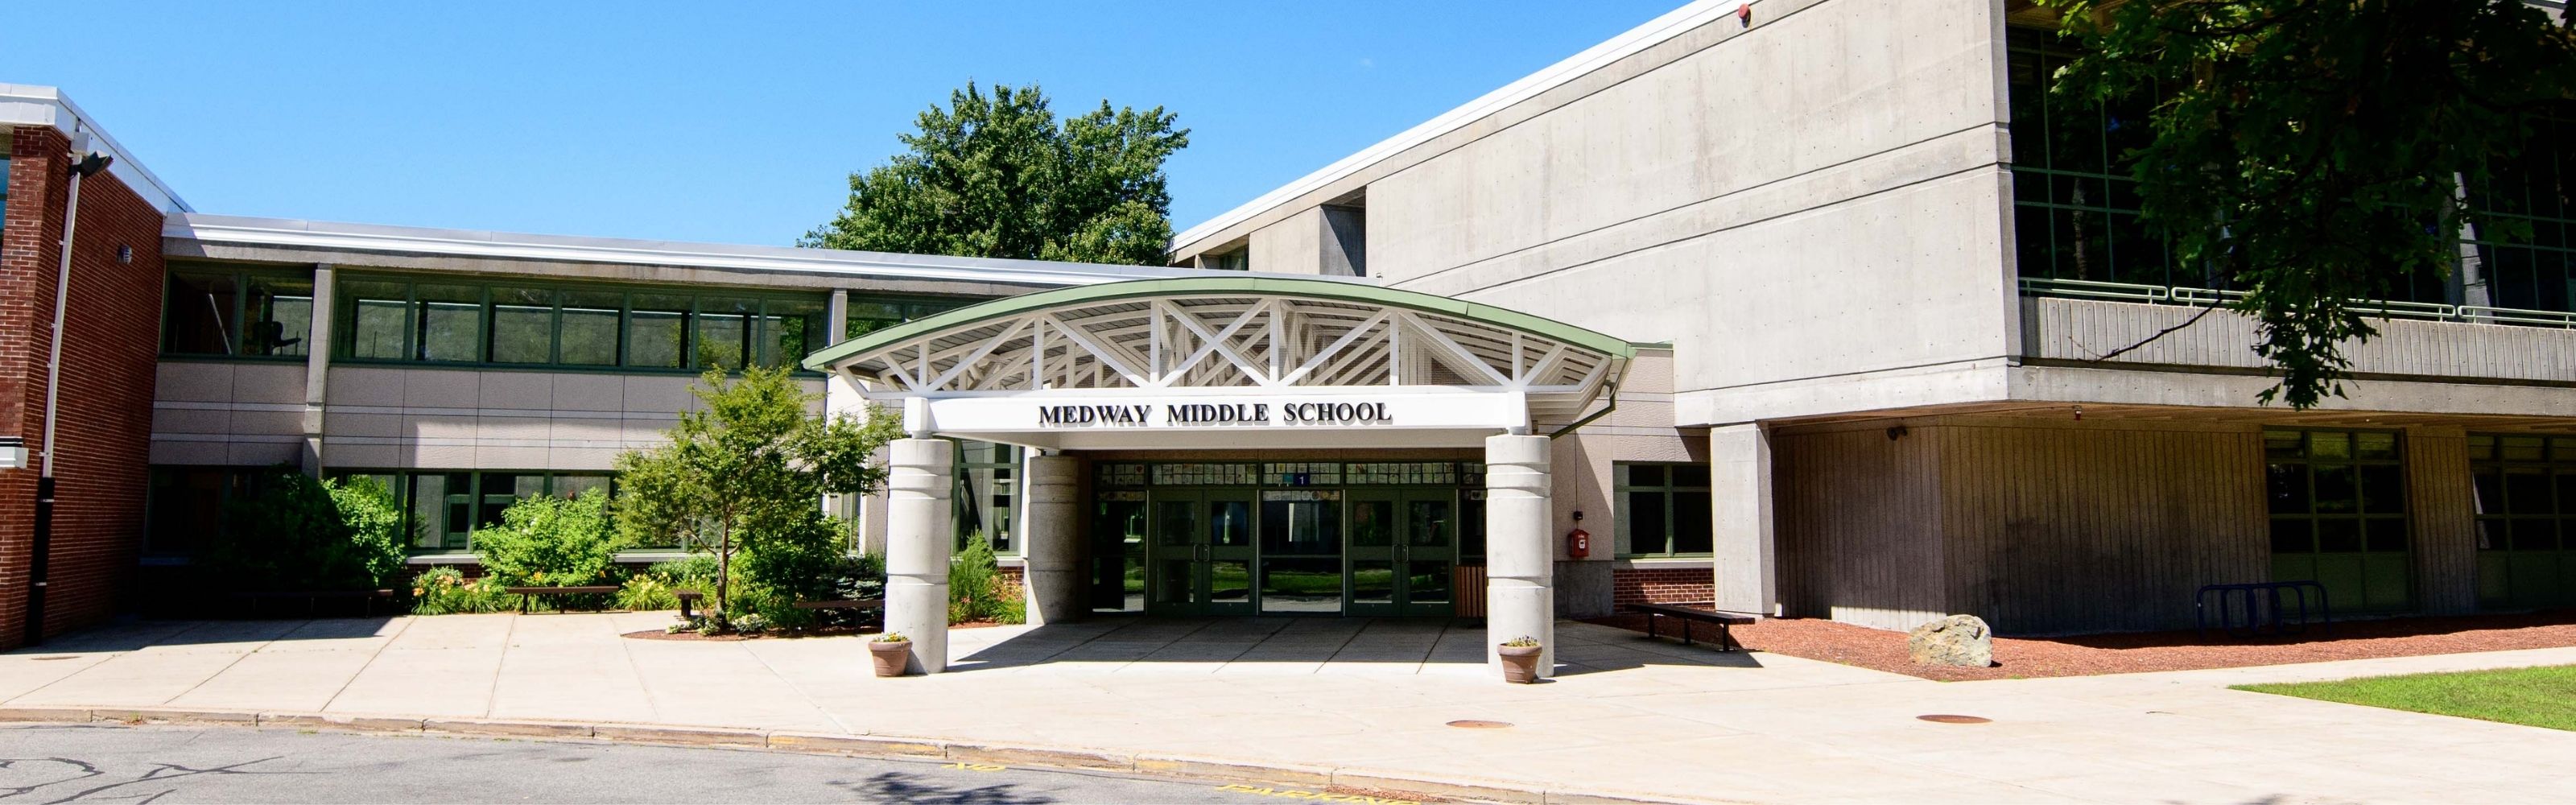 MEDWAY MIDDLE SCHOOL